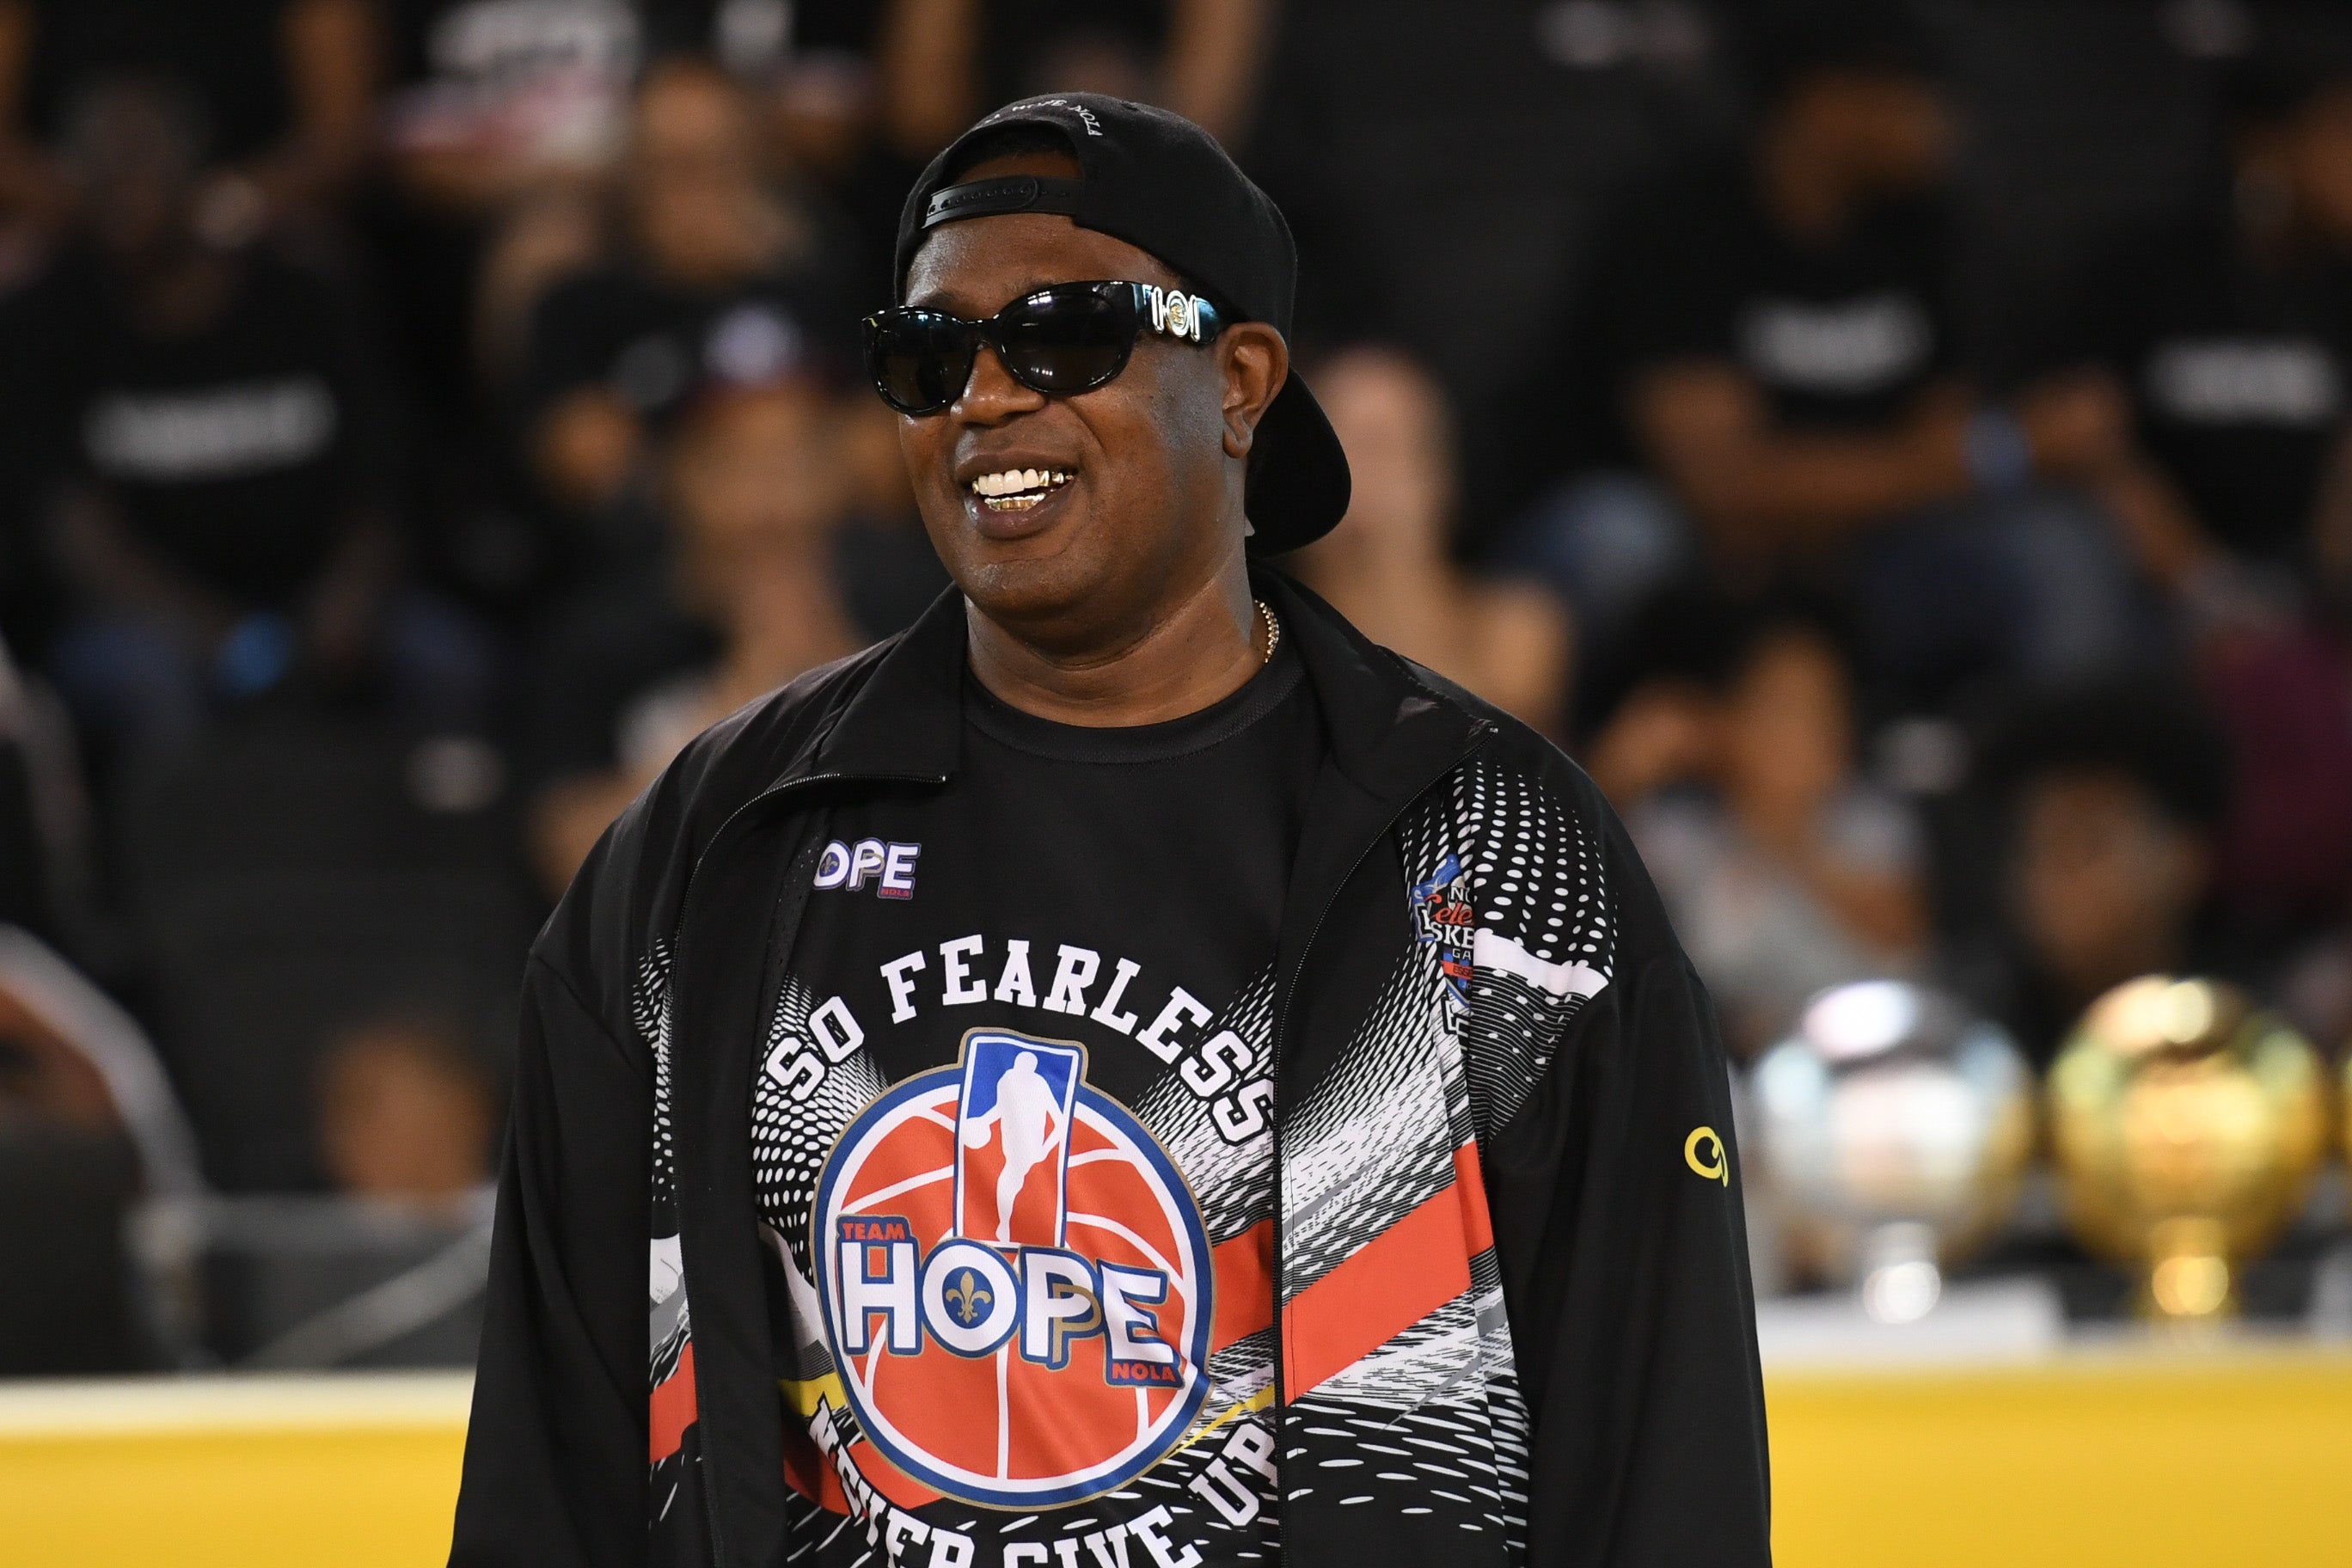 Master P Honors Slain 7-Year-Old At Celebrity Basketball Game